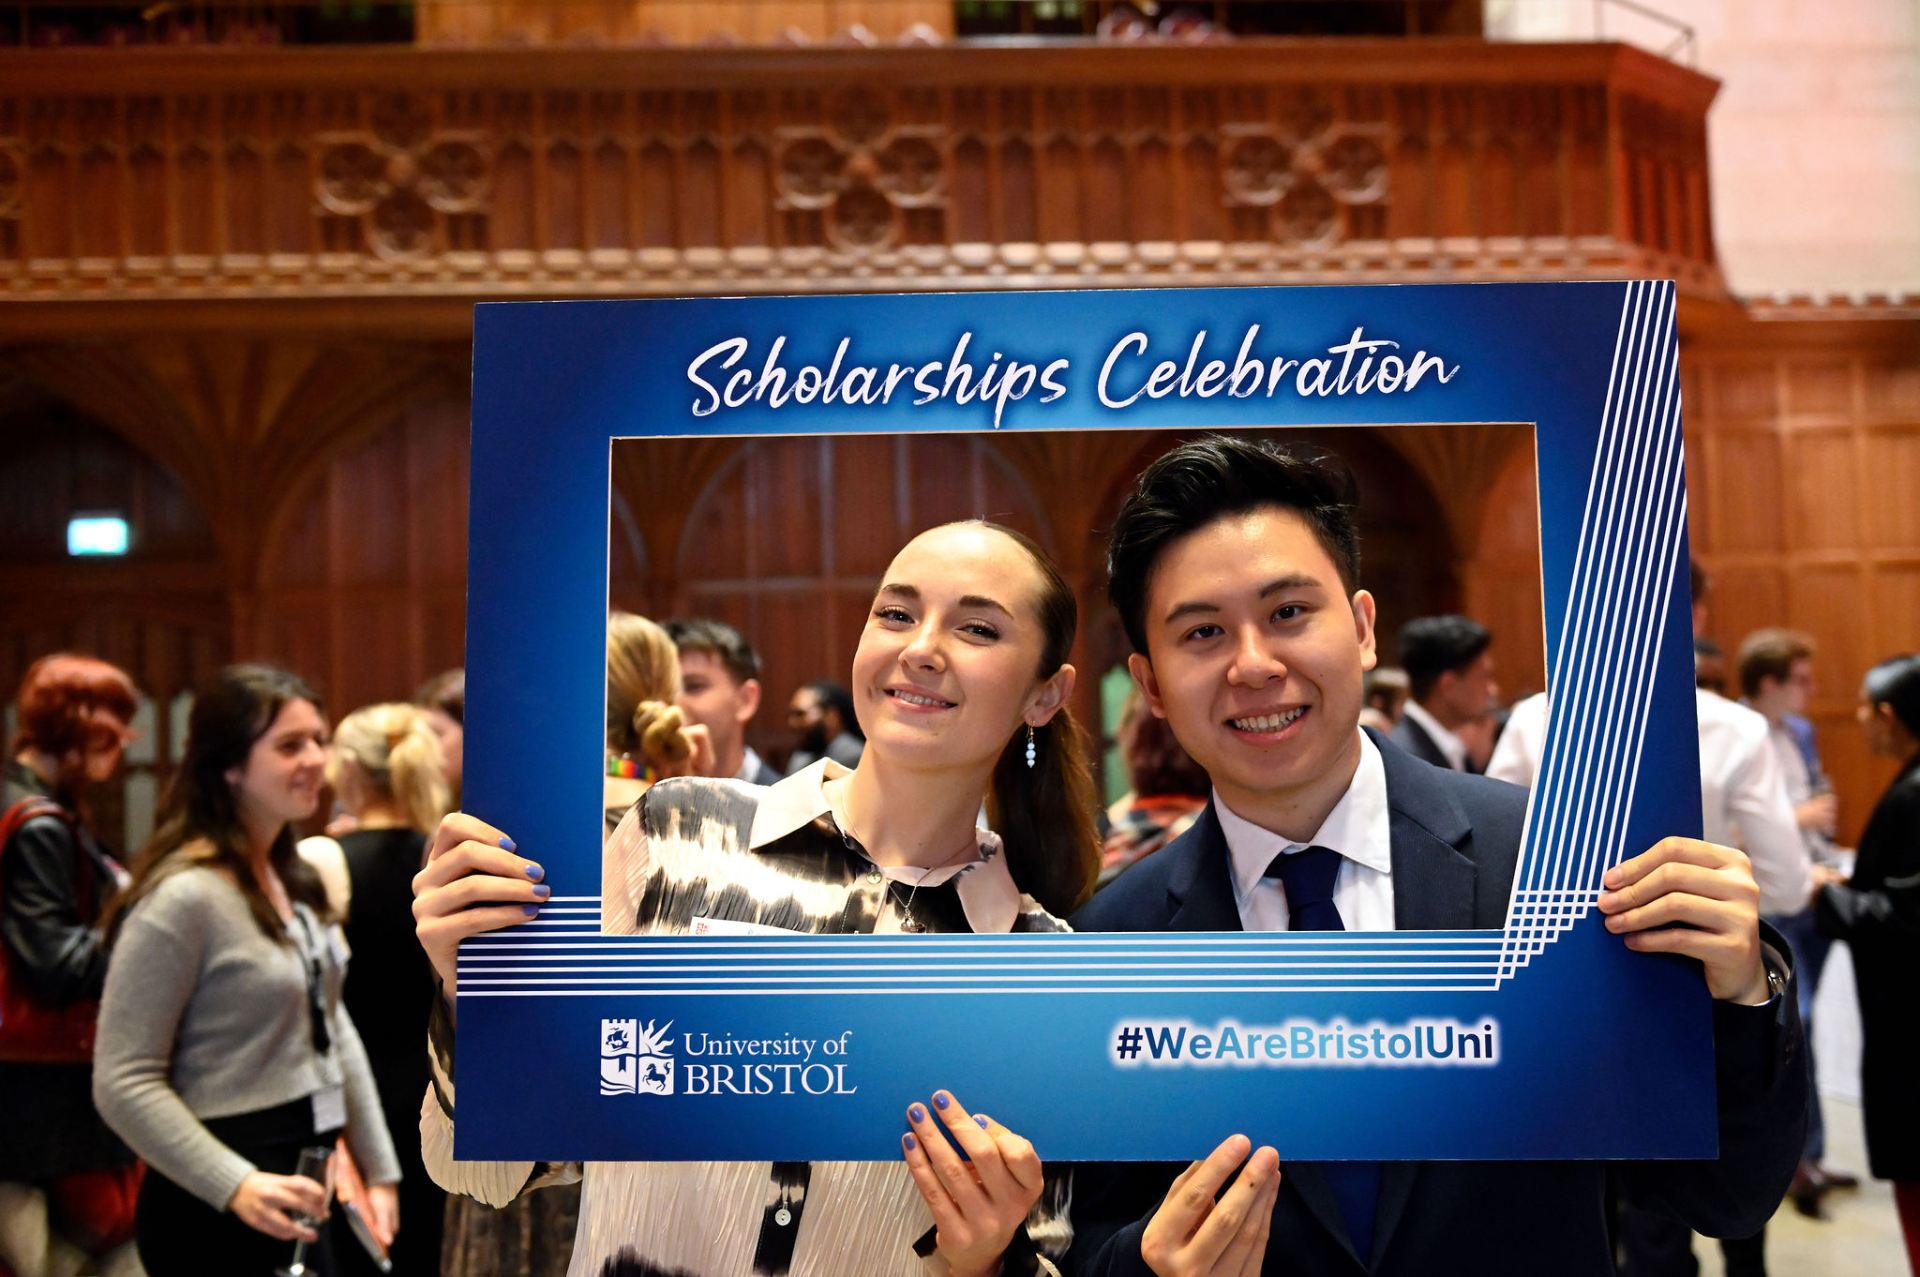 Rose and Ryan pose in a Scholarship Celebration frame at the event.